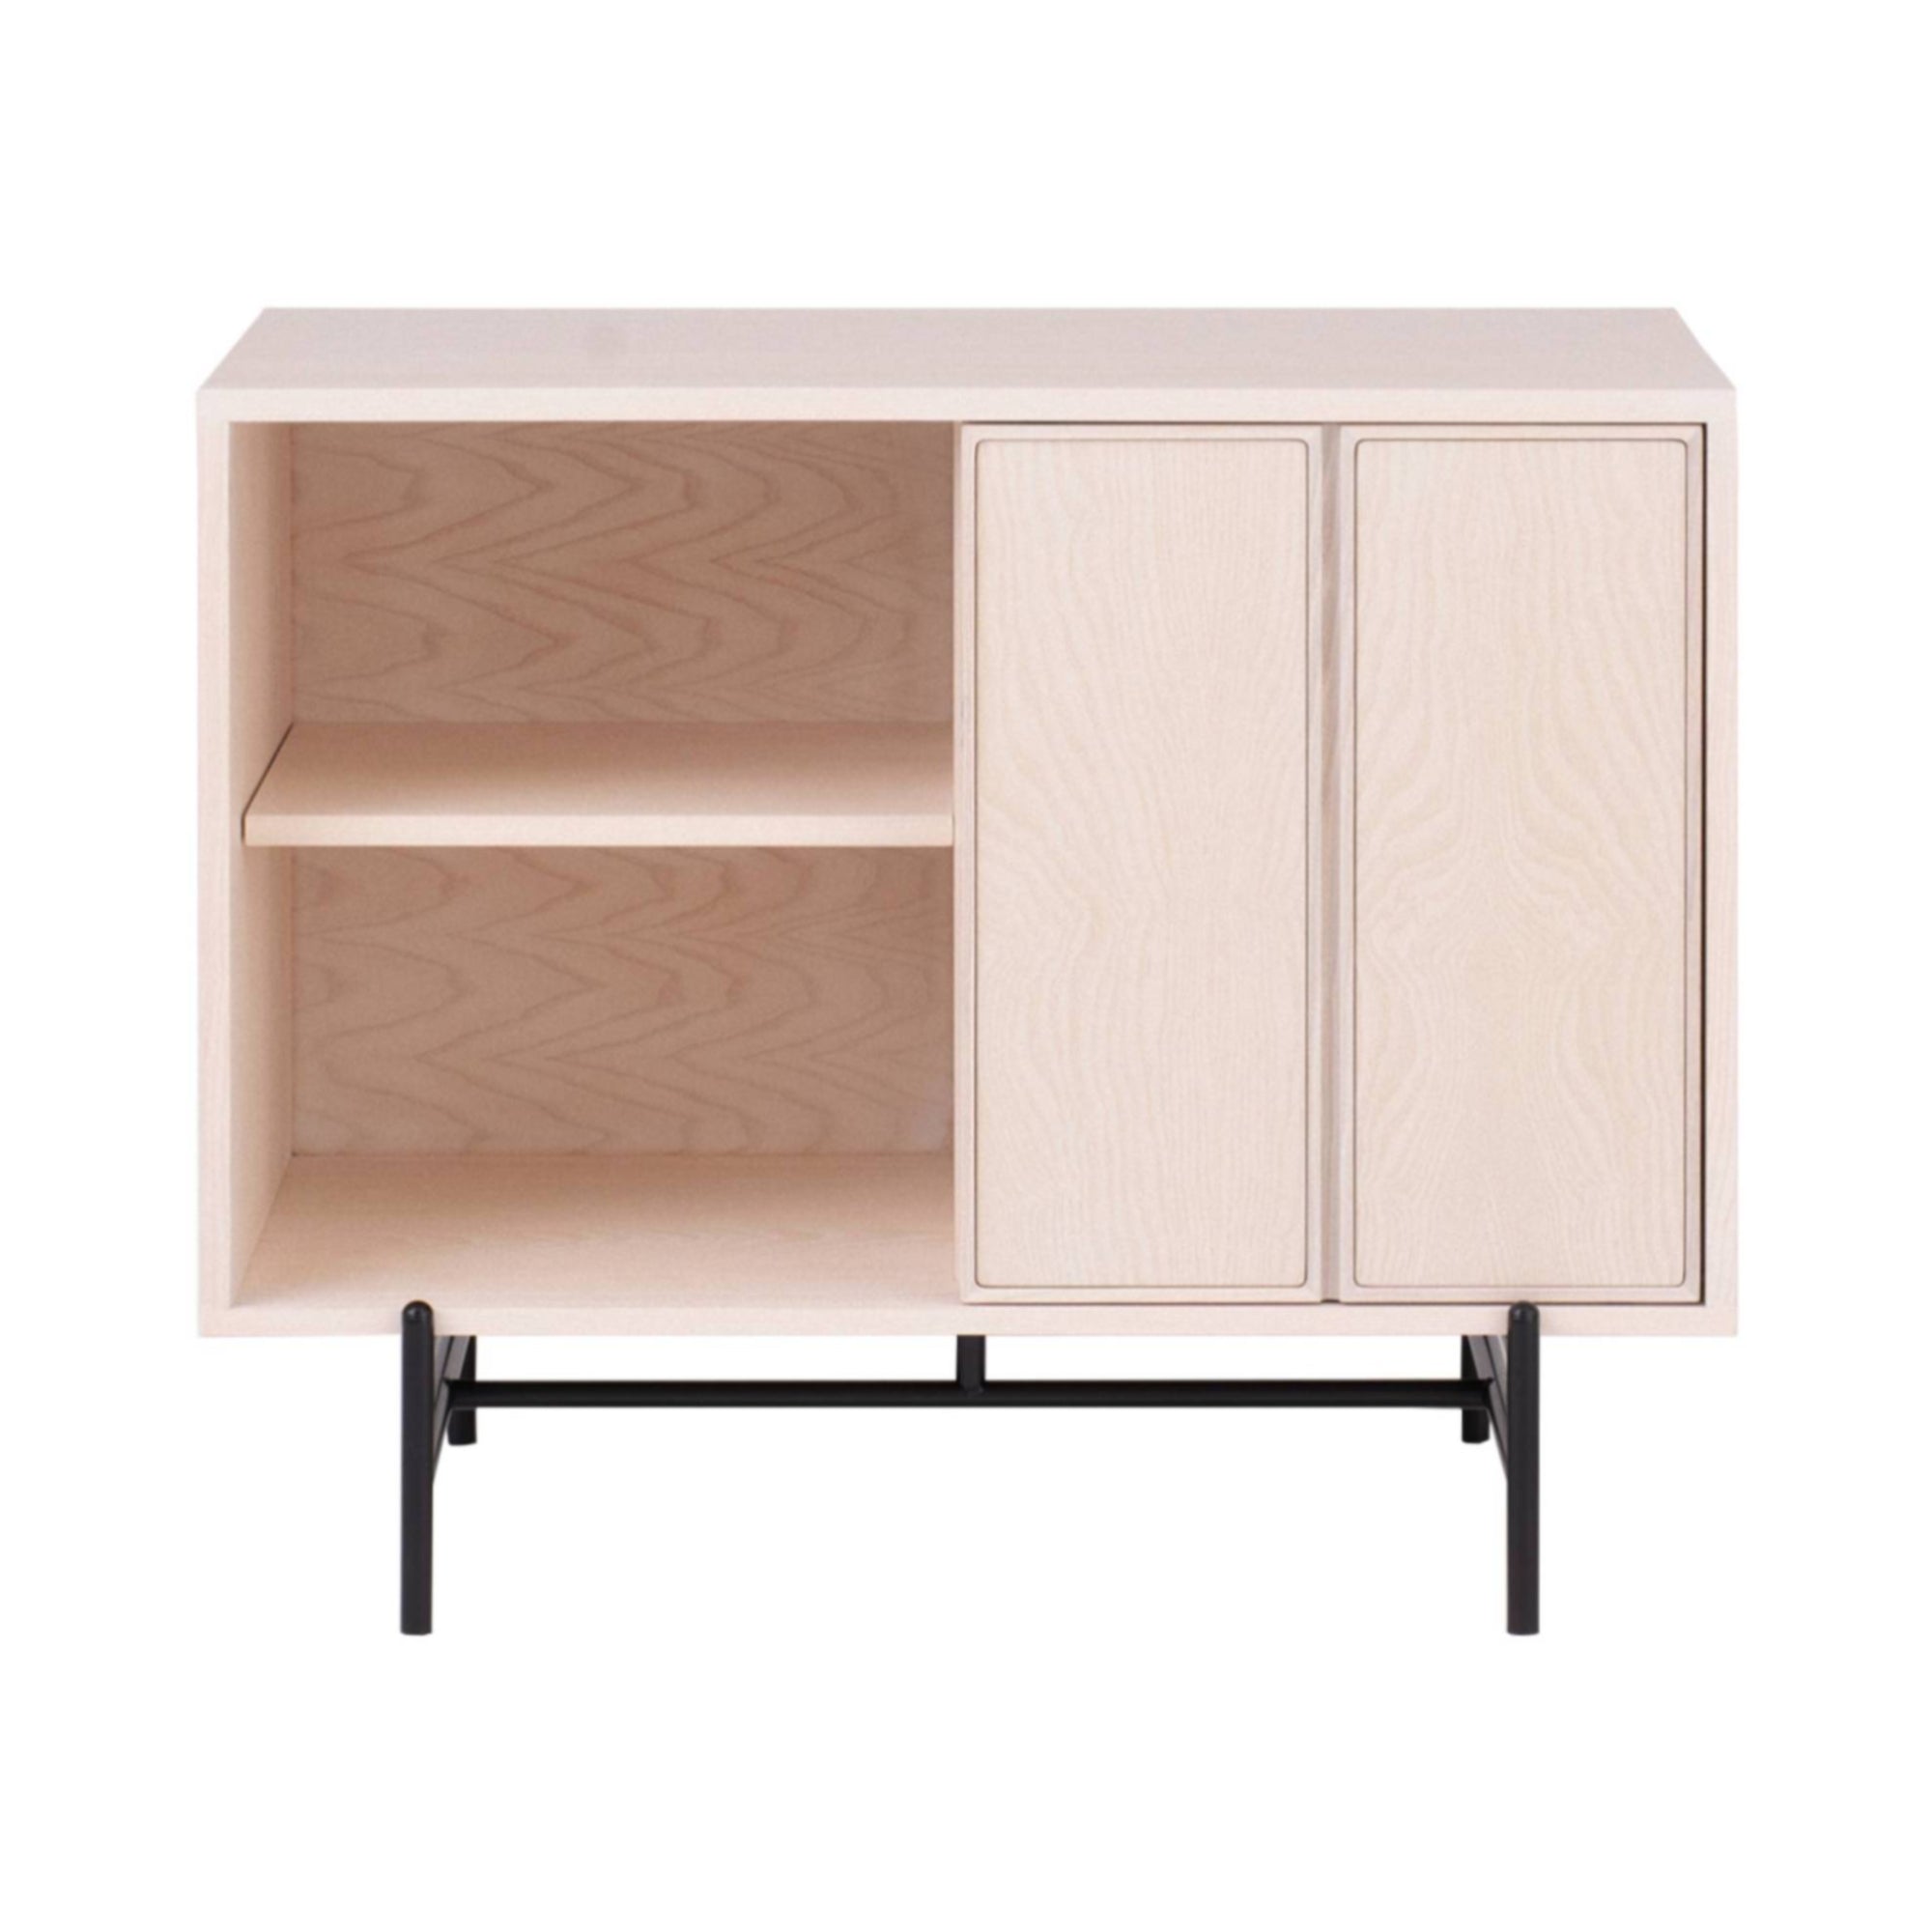 Canvas Cabinet Wood: Small + Off White